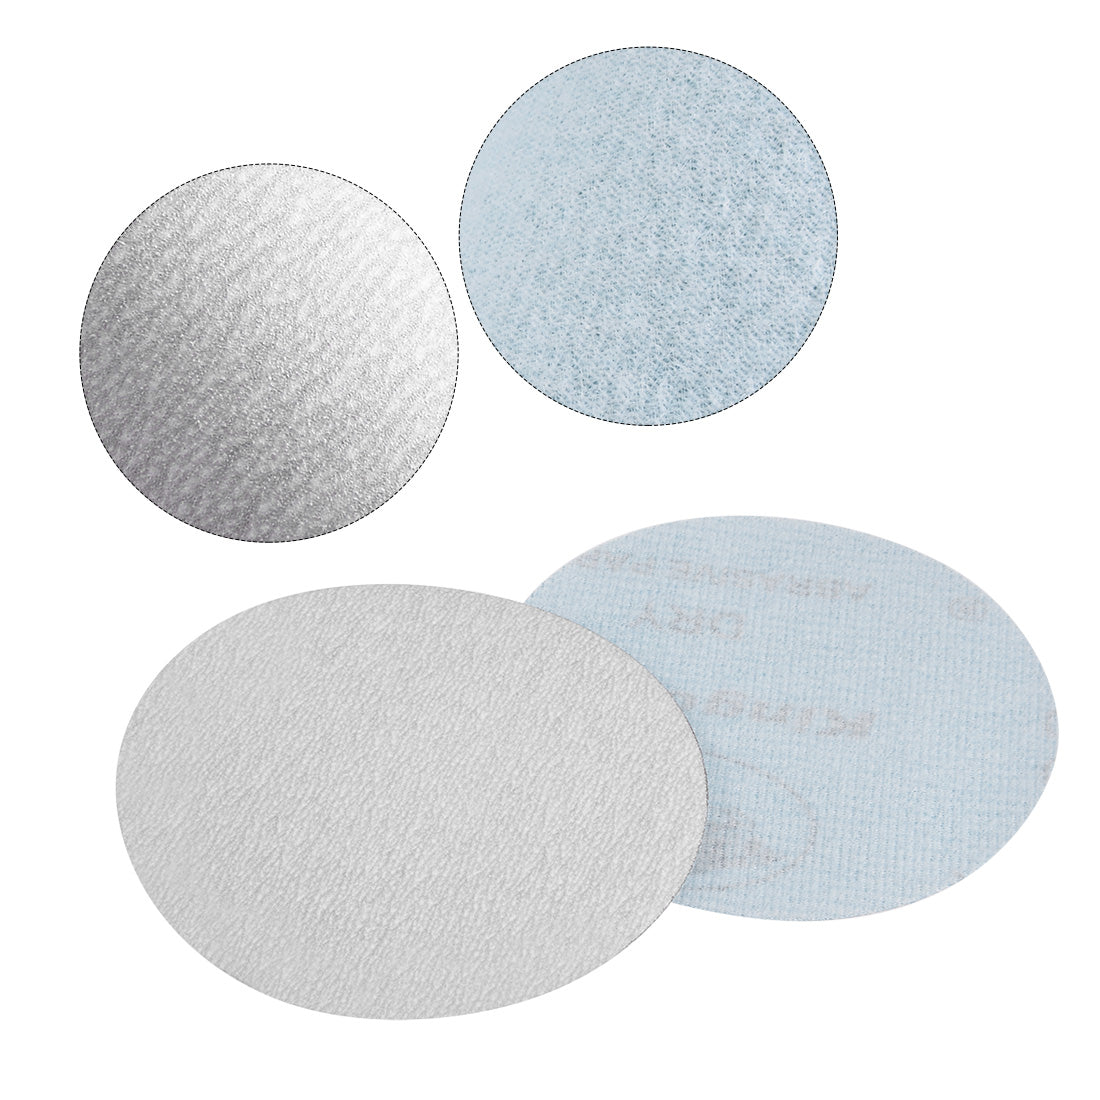 Uxcell Uxcell 50 Pcs 4-Inch Aluminum Oxide White Dry Hook and Loop Sanding Discs Flocking Sandpaper 320 Grit